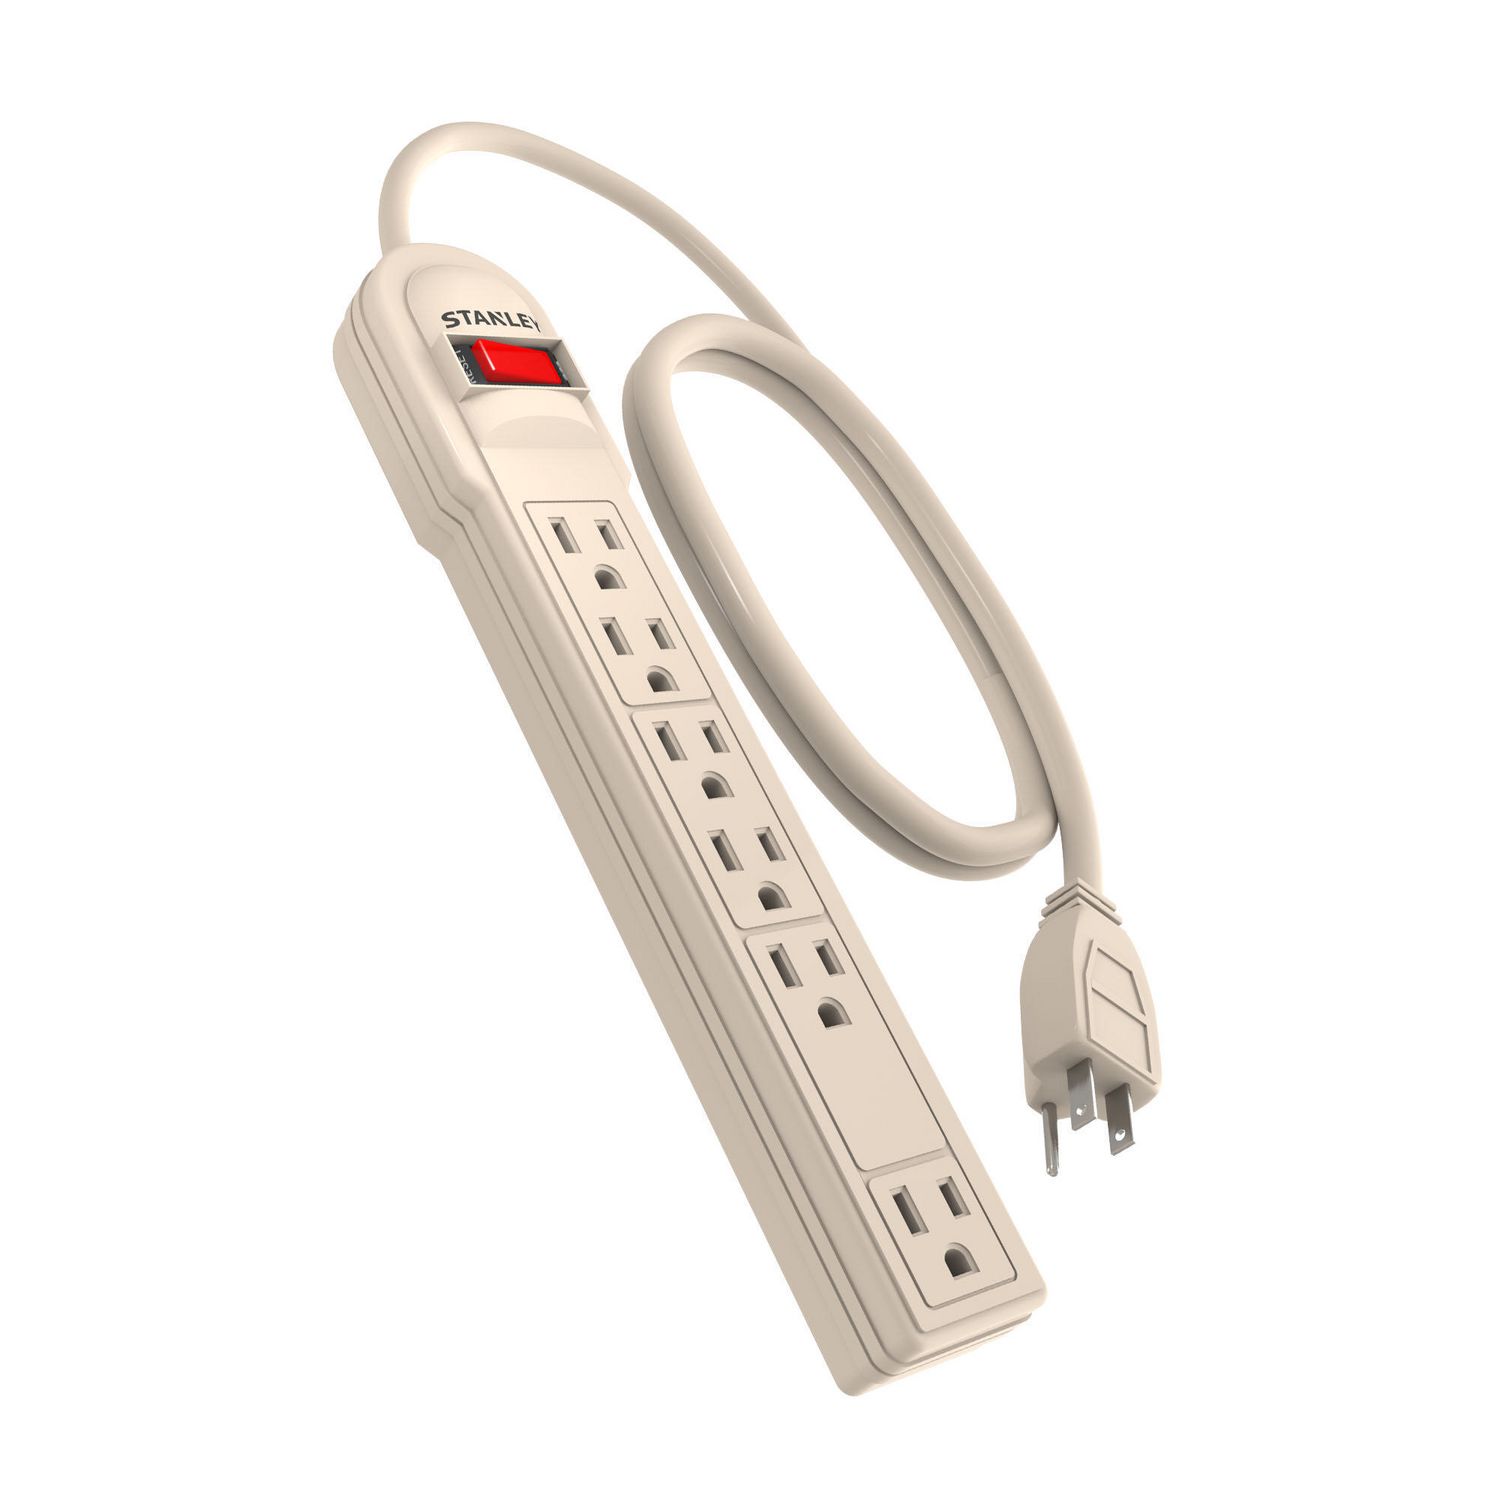 Stanley Plastic Surge Protector-33220 Surge Protector with 3' Cord